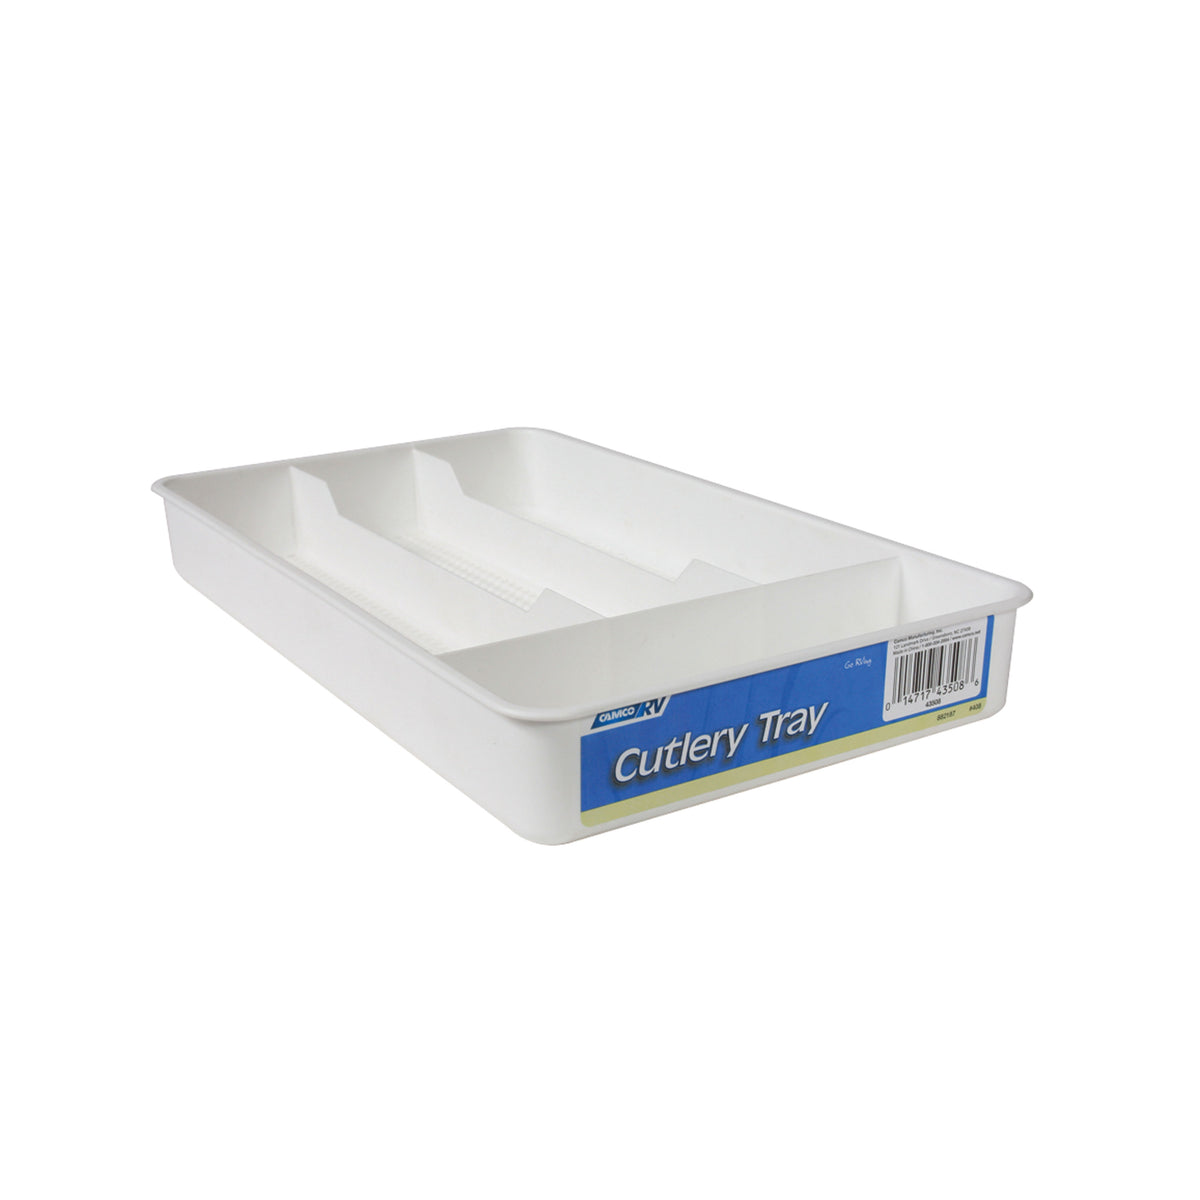 Camco 43508 Cutlery Tray - 7" x 11"